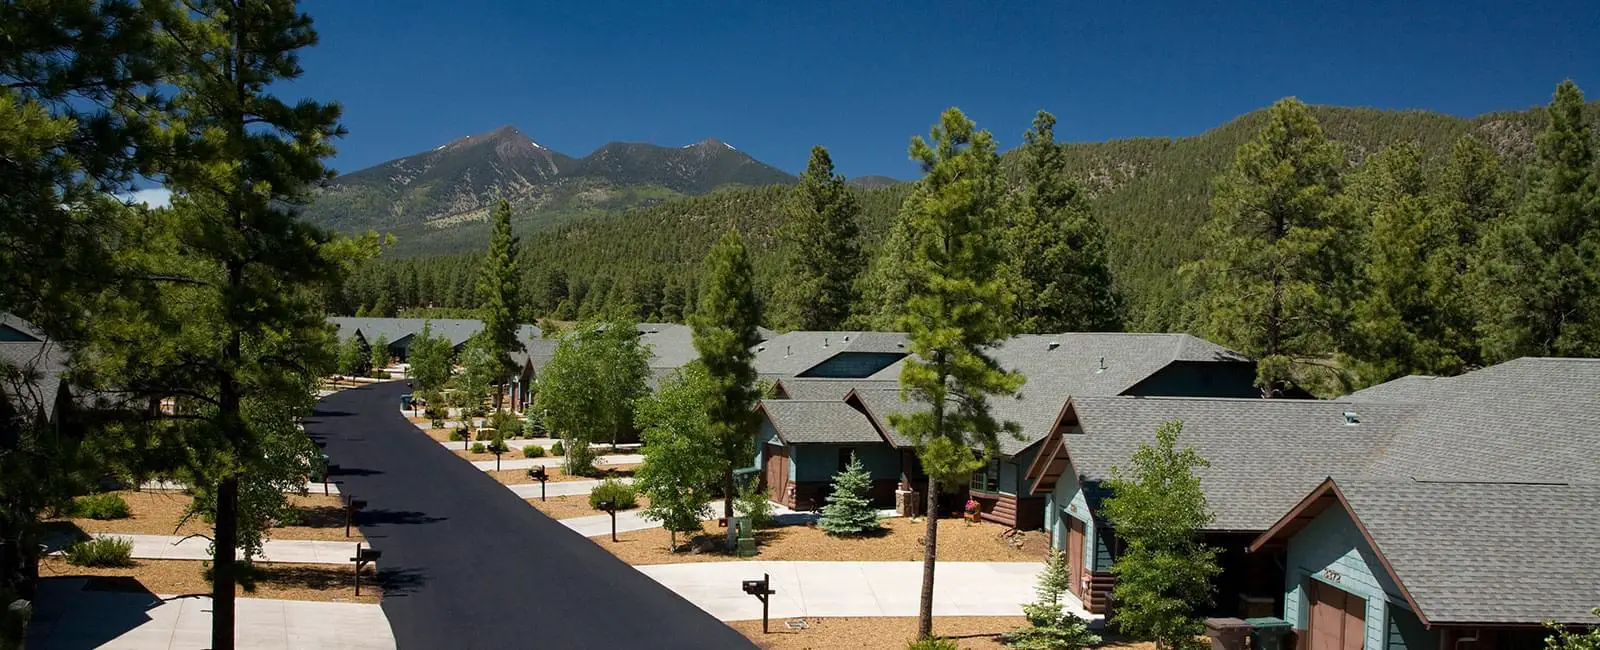 Thumbnail of The Peaks, Assisted Living, Nursing Home, Independent Living, CCRC, Flagstaff, AZ 1